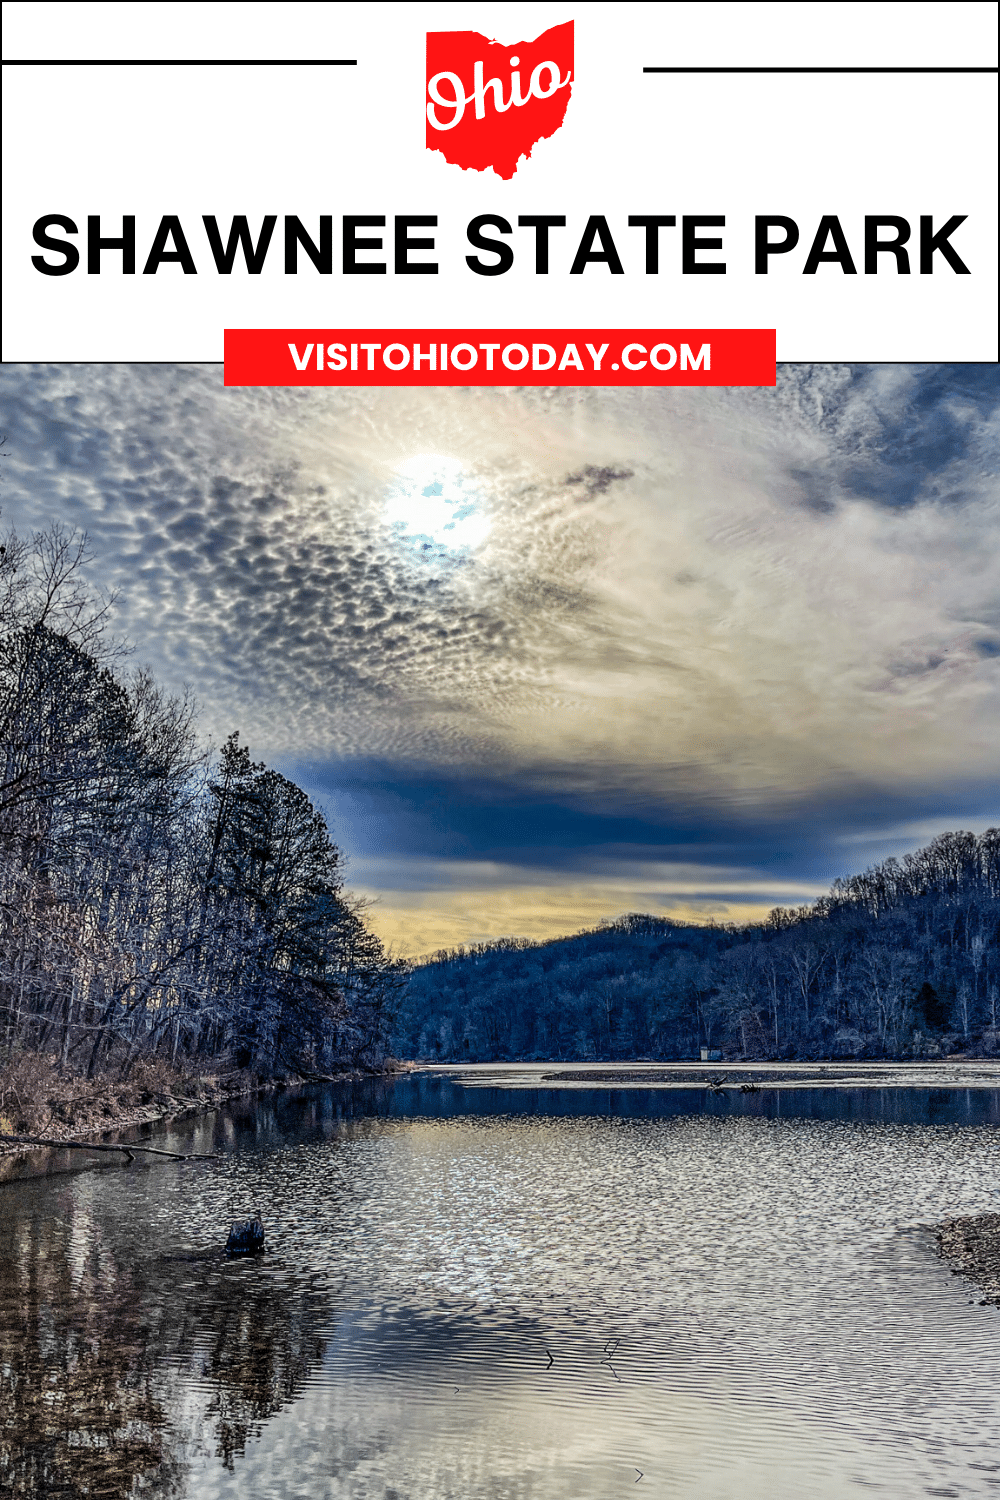 Shawnee State Park is located in southern Ohio. The serenity of nature awaits you in the hills and valleys of this picturesque landscape, part of the 63,000-acre Shawnee State Forest.